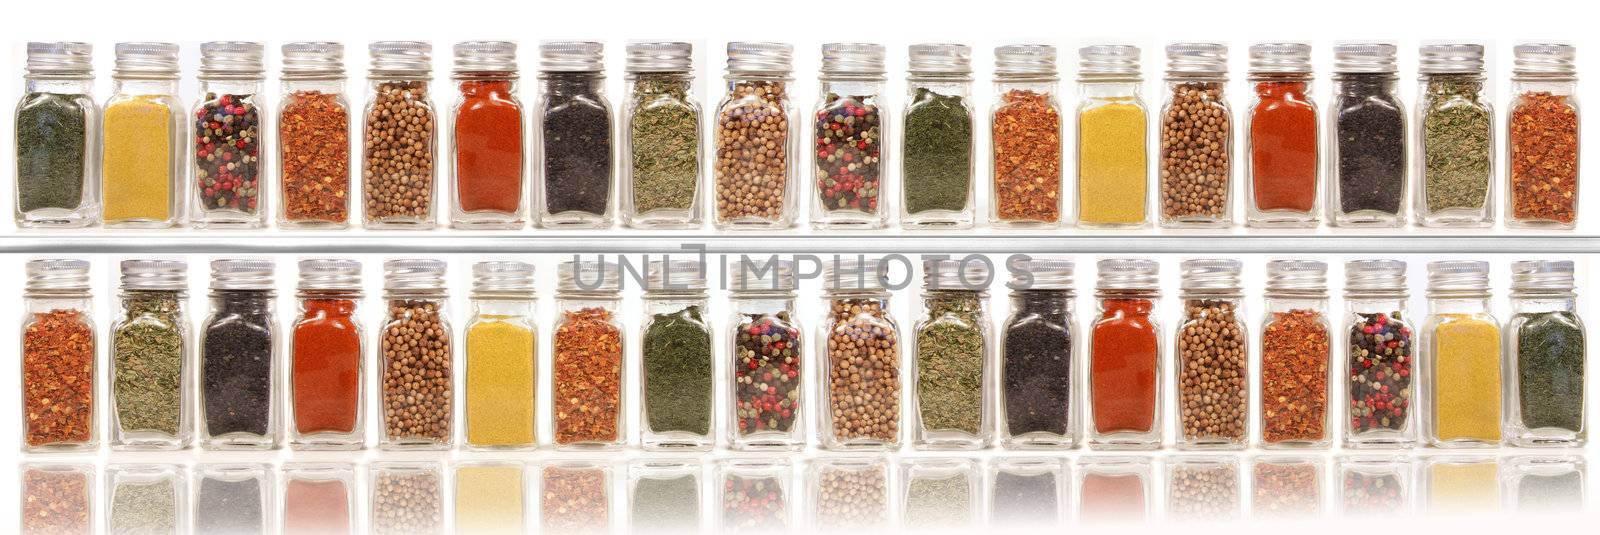 Assorted spices on two layer shelves against white background